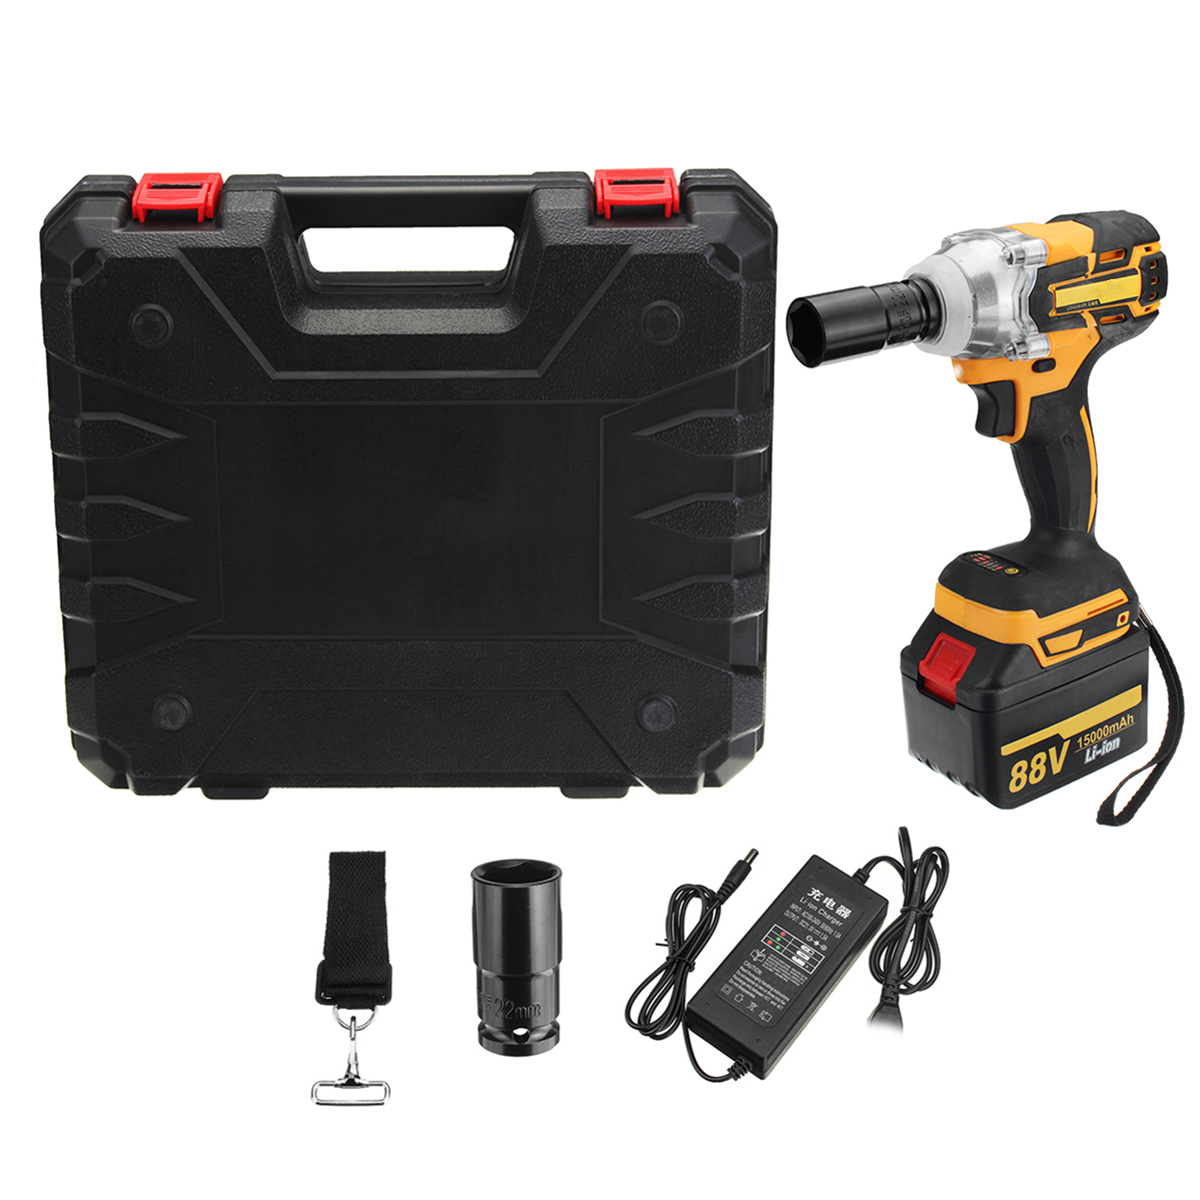 88V-15000mAh-Electric-Brushless-Impact-Wrench-DIY-Cordless-Drive-with-Li-Ion-Battery--Charger-1592148-1